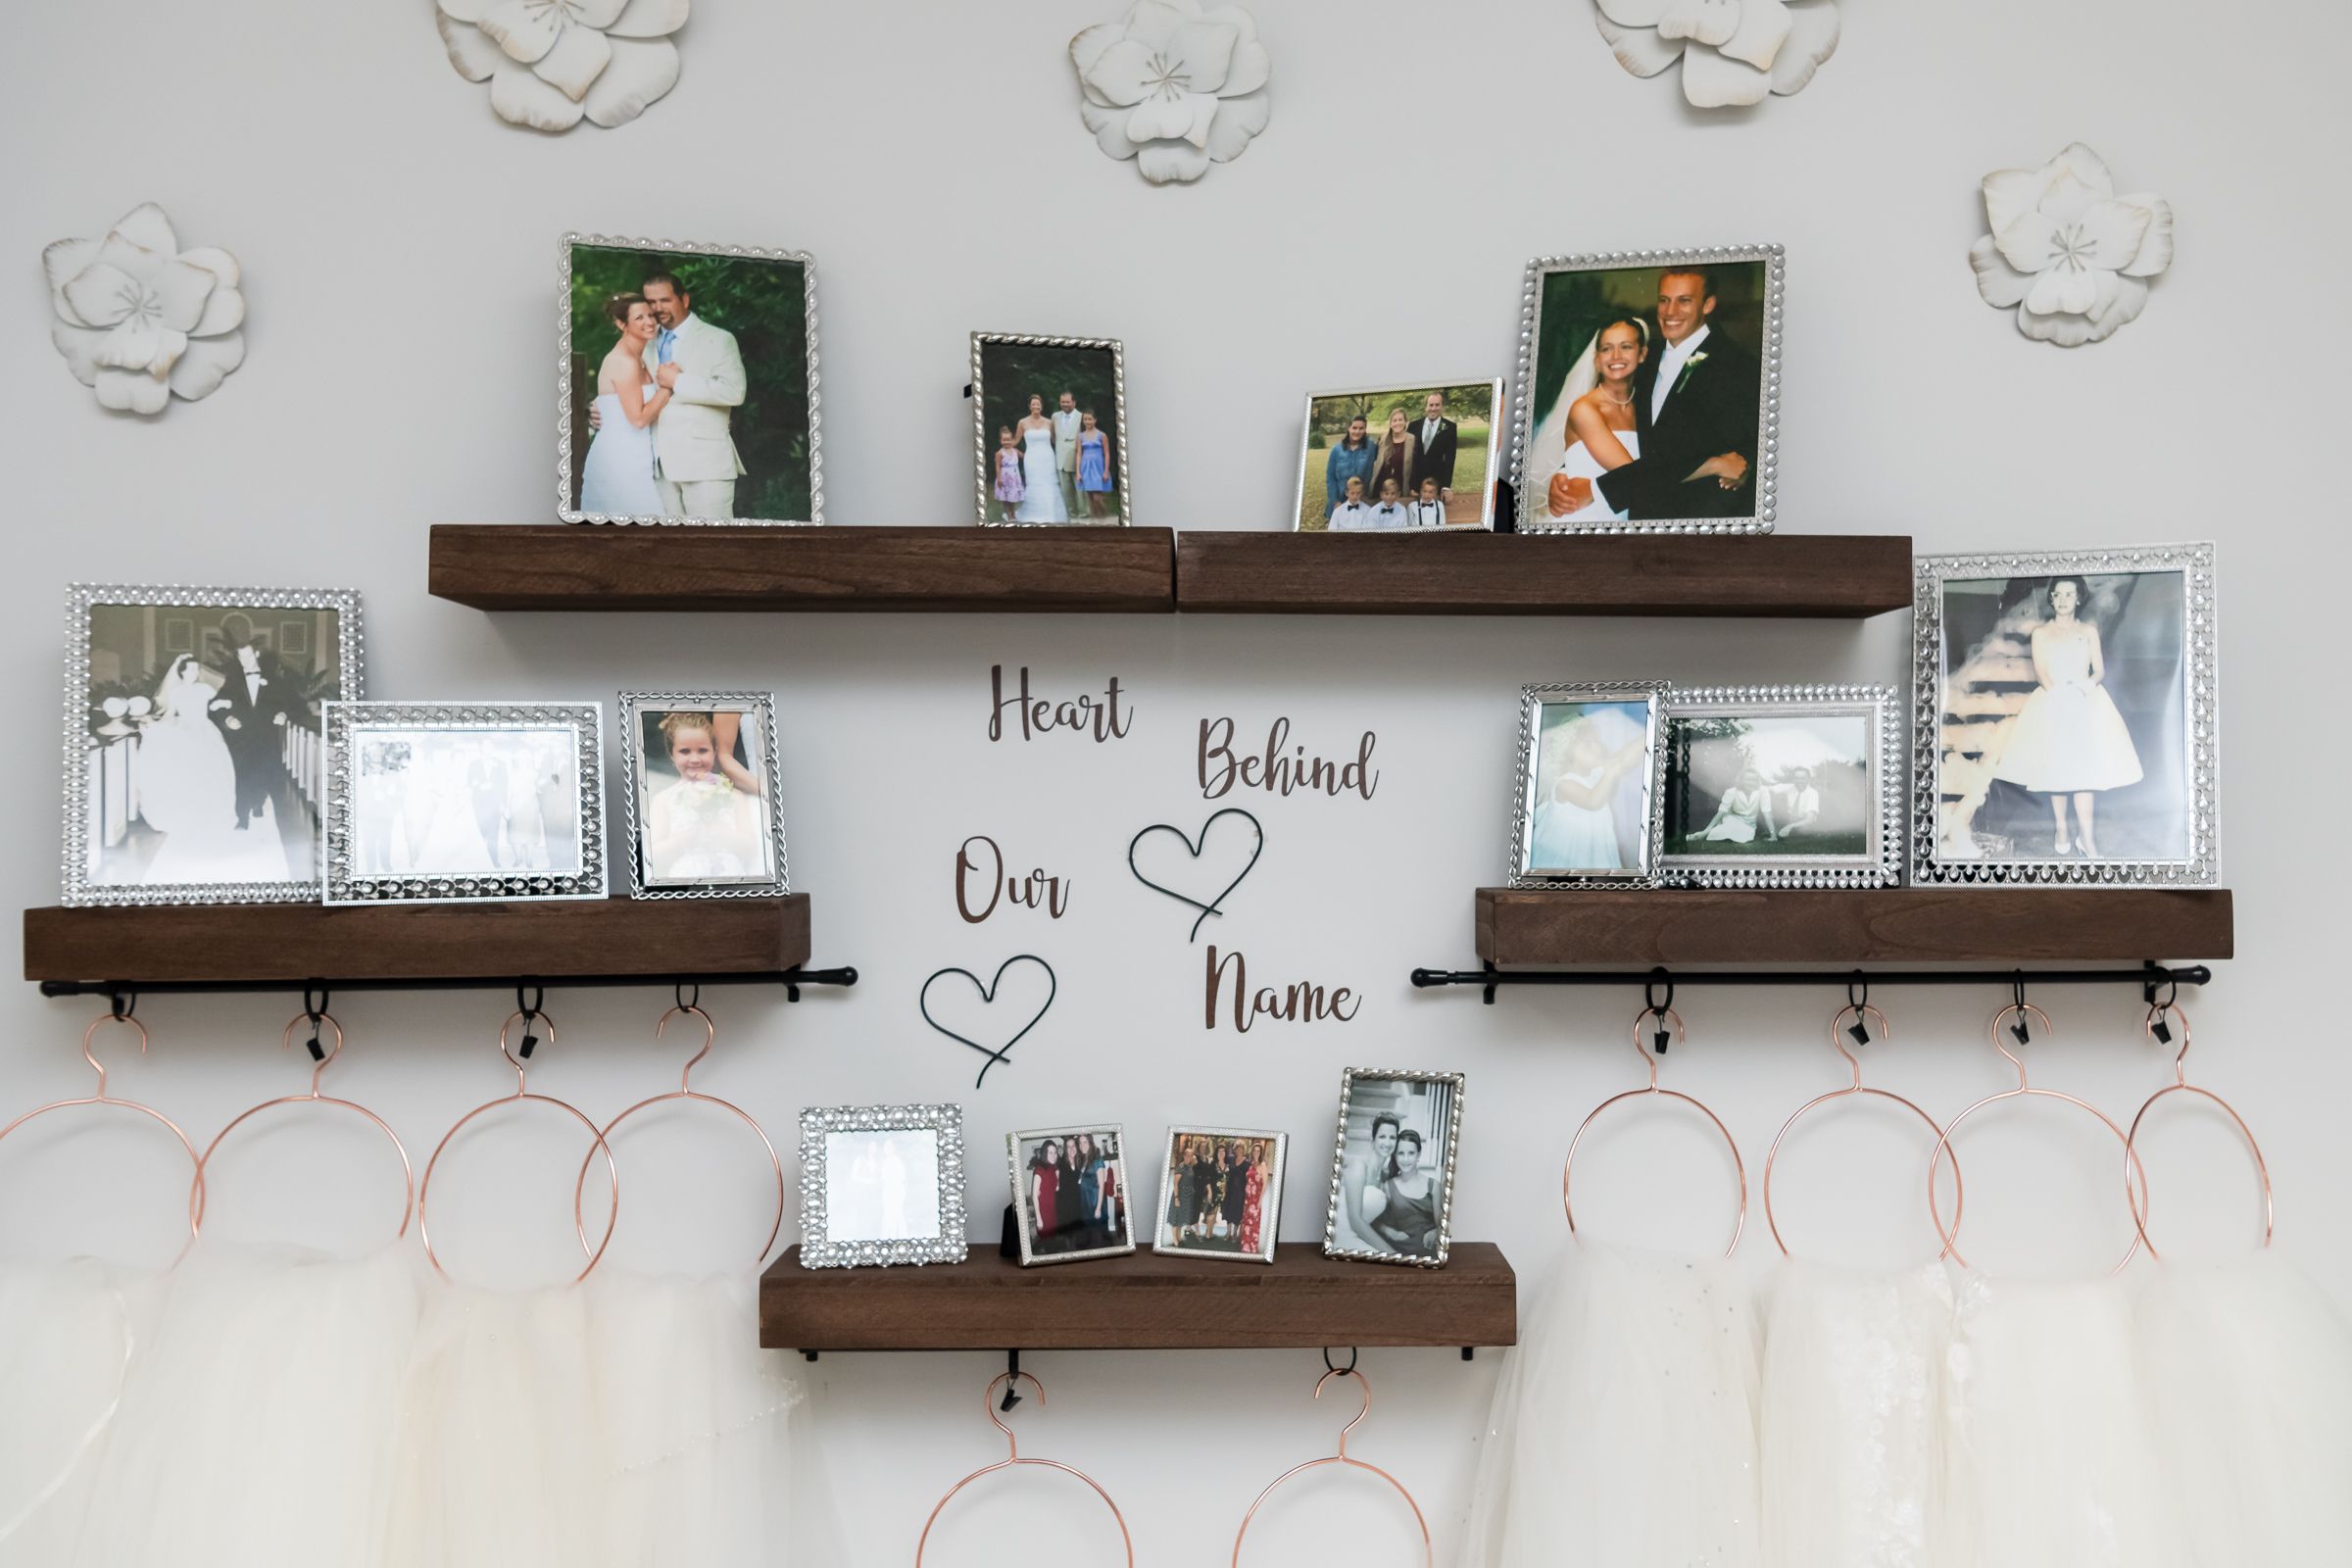 A wall of photos showing generations of weddings and love in the owners' lives.